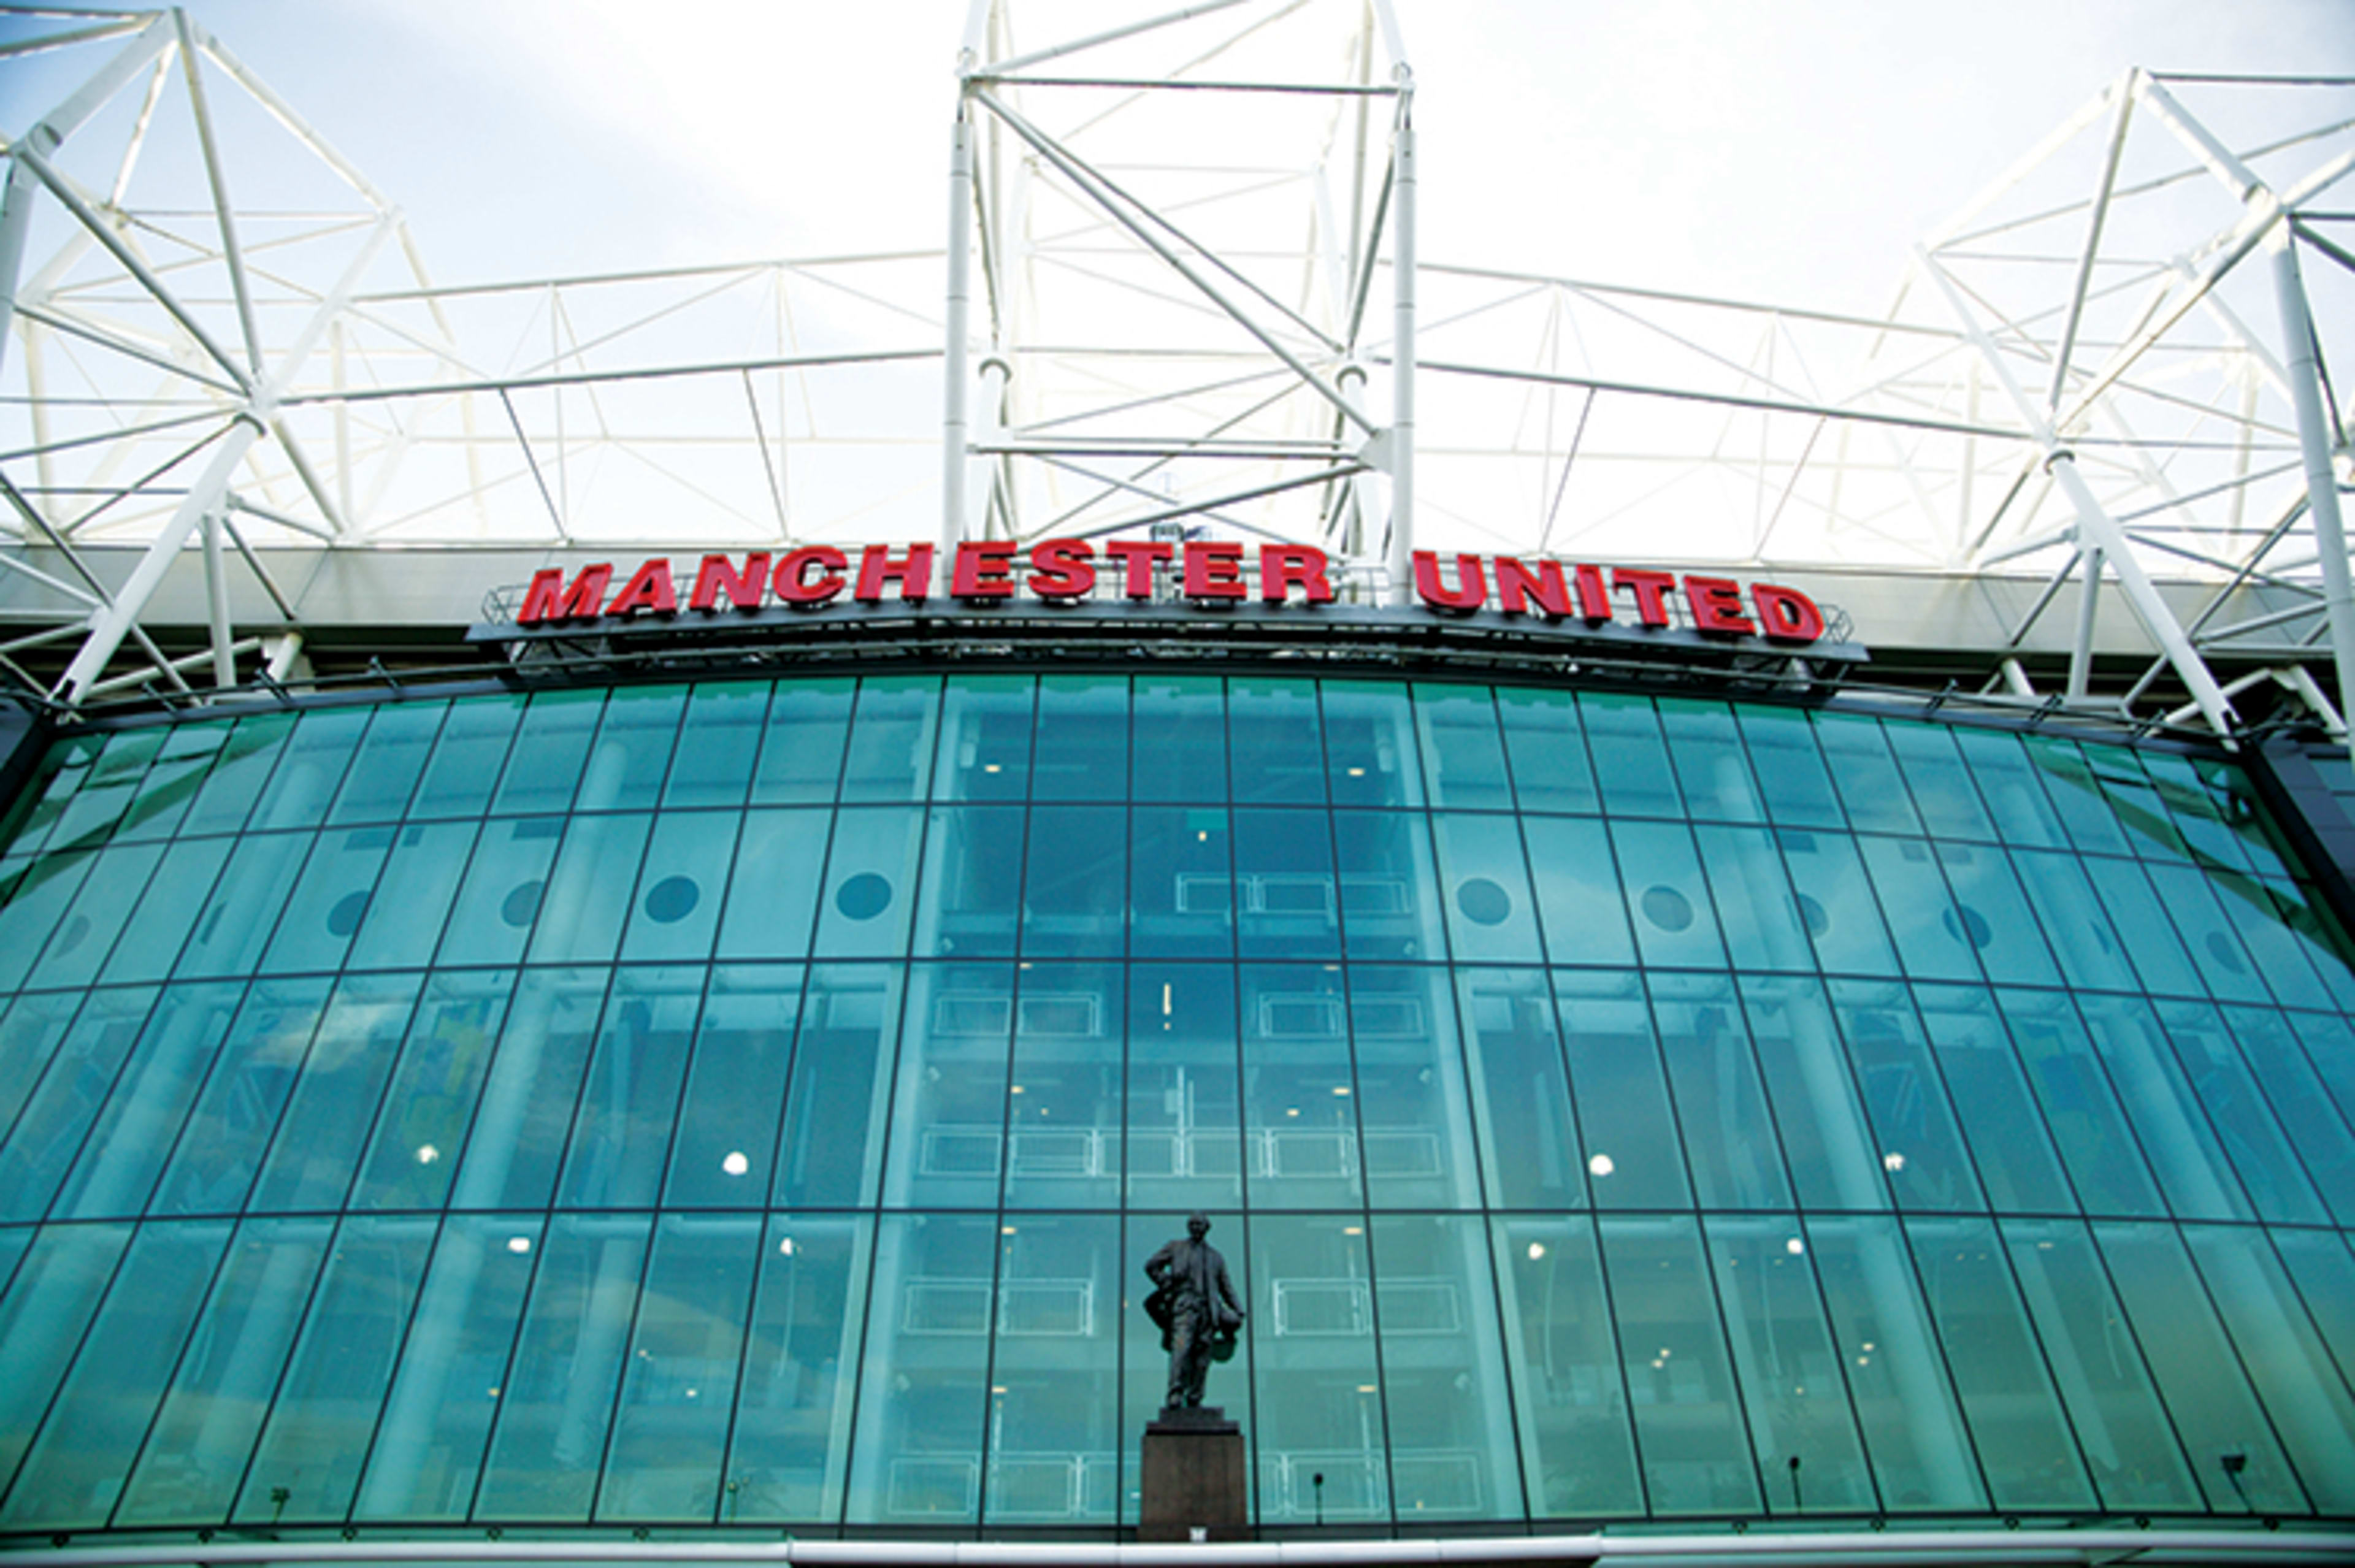 Old Trafford football stadium, home to Manchester United F.C.